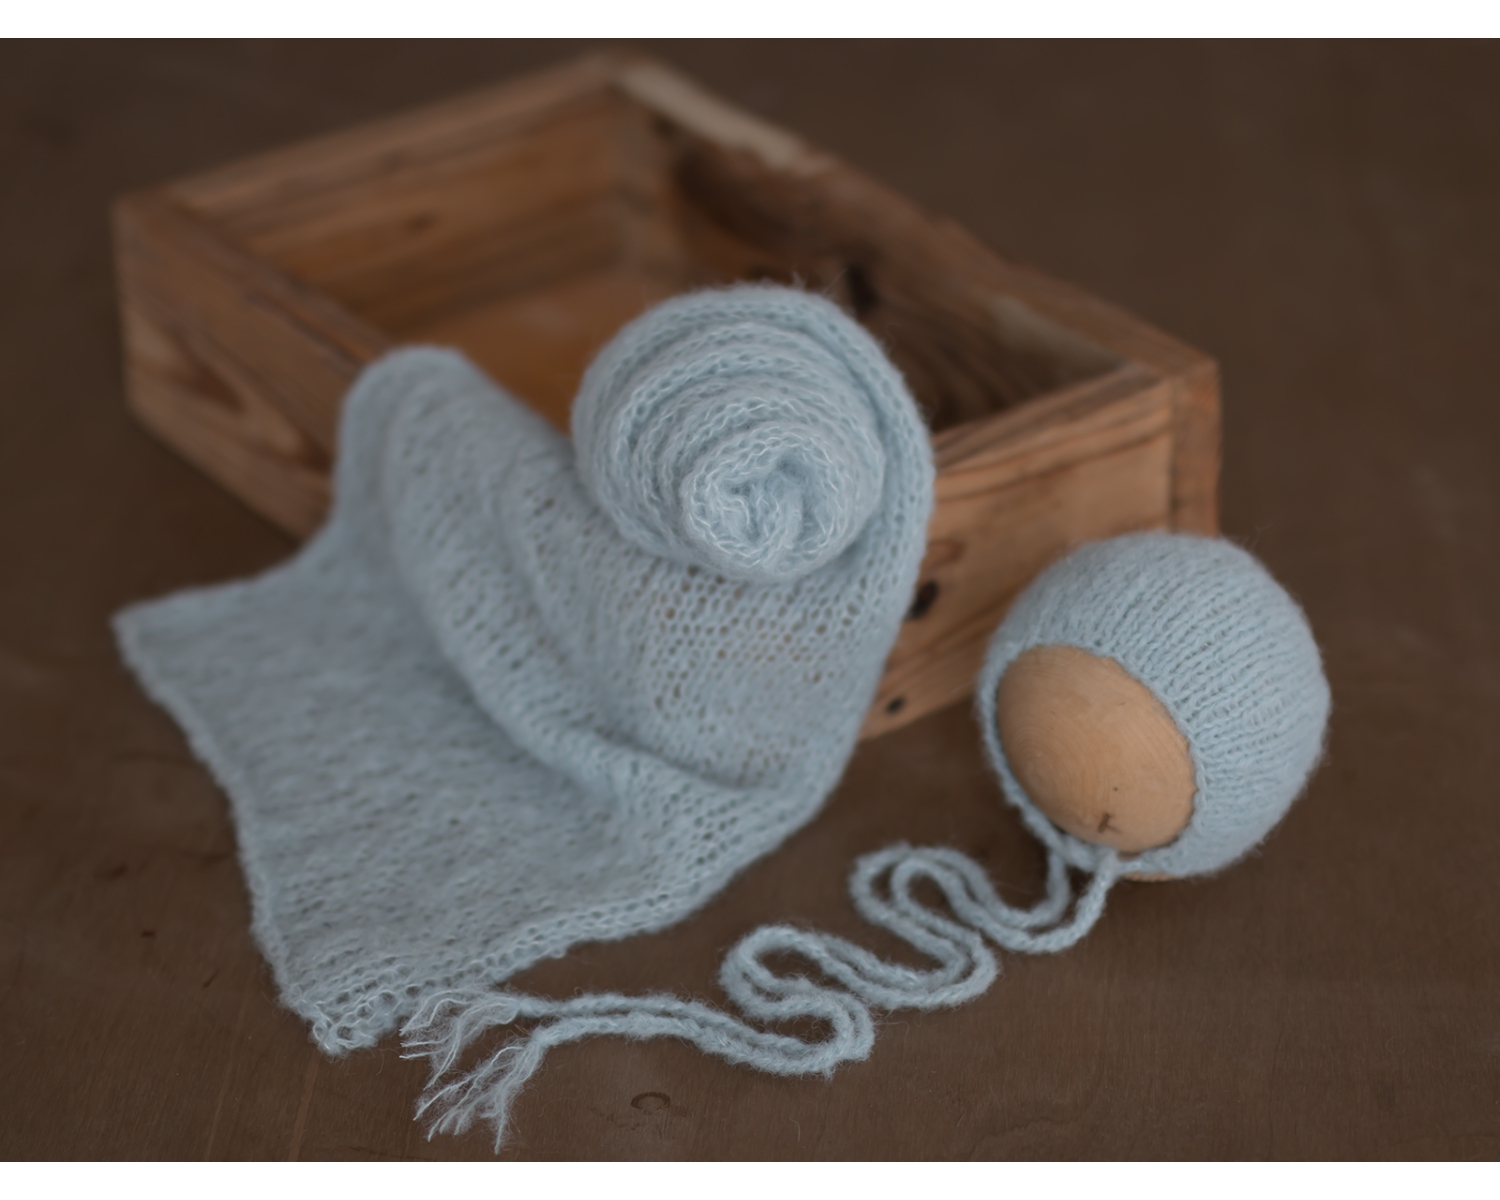 Light blue mohair knitted Wrap 150cm (59 in)  or set with the matching newborn Bonnet